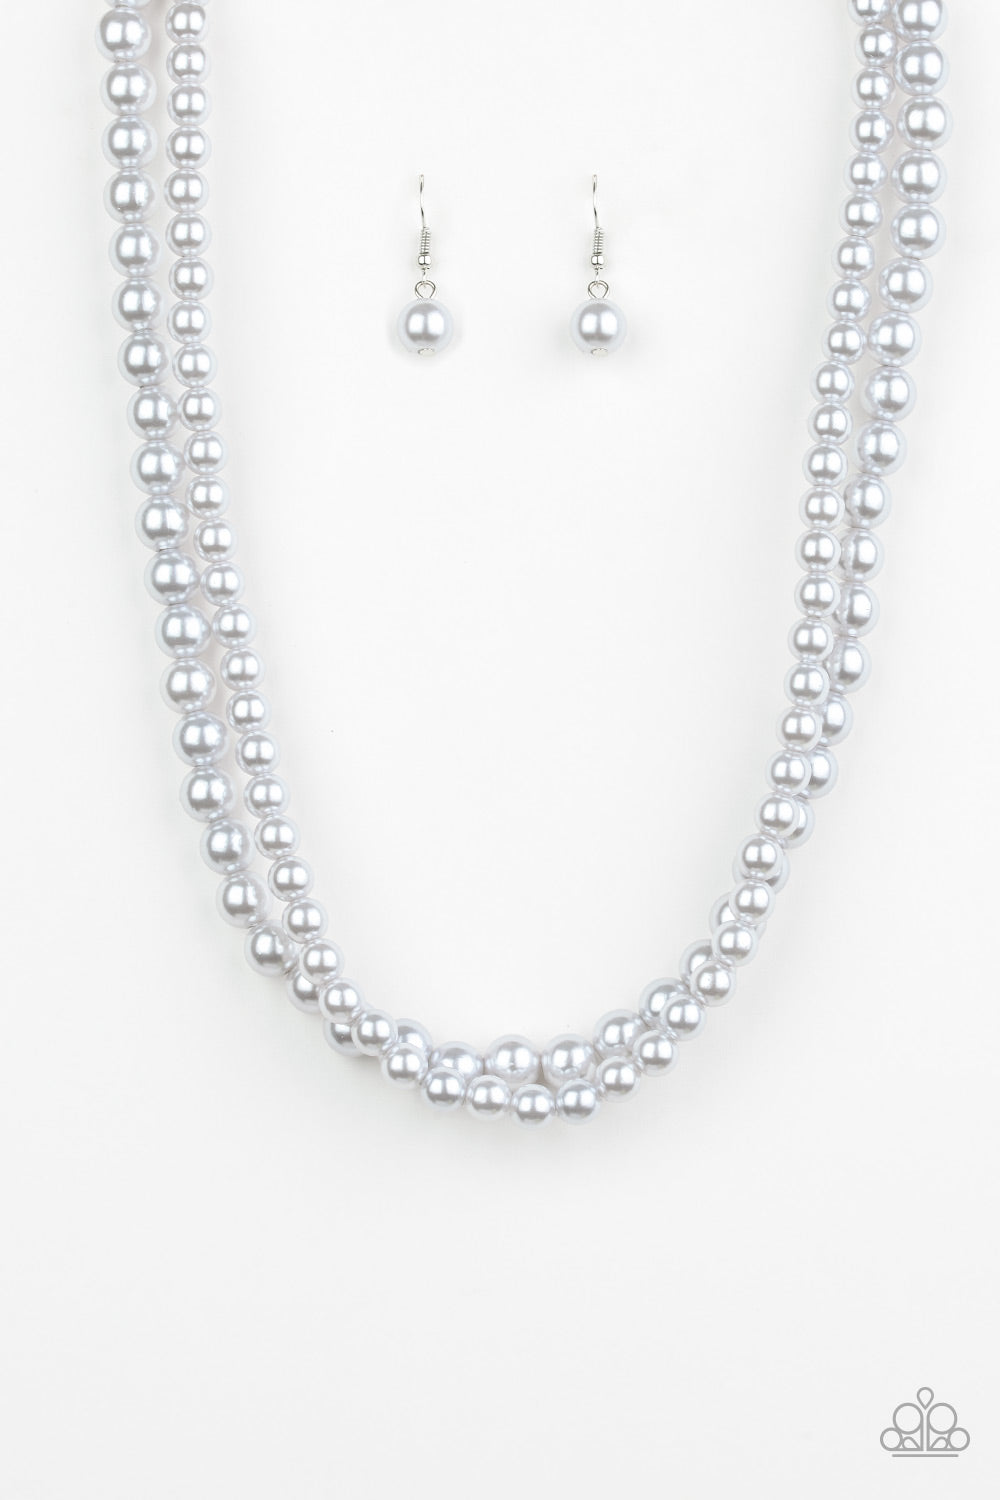 WOMAN OF THE CENTURY - SILVER NECKLACE